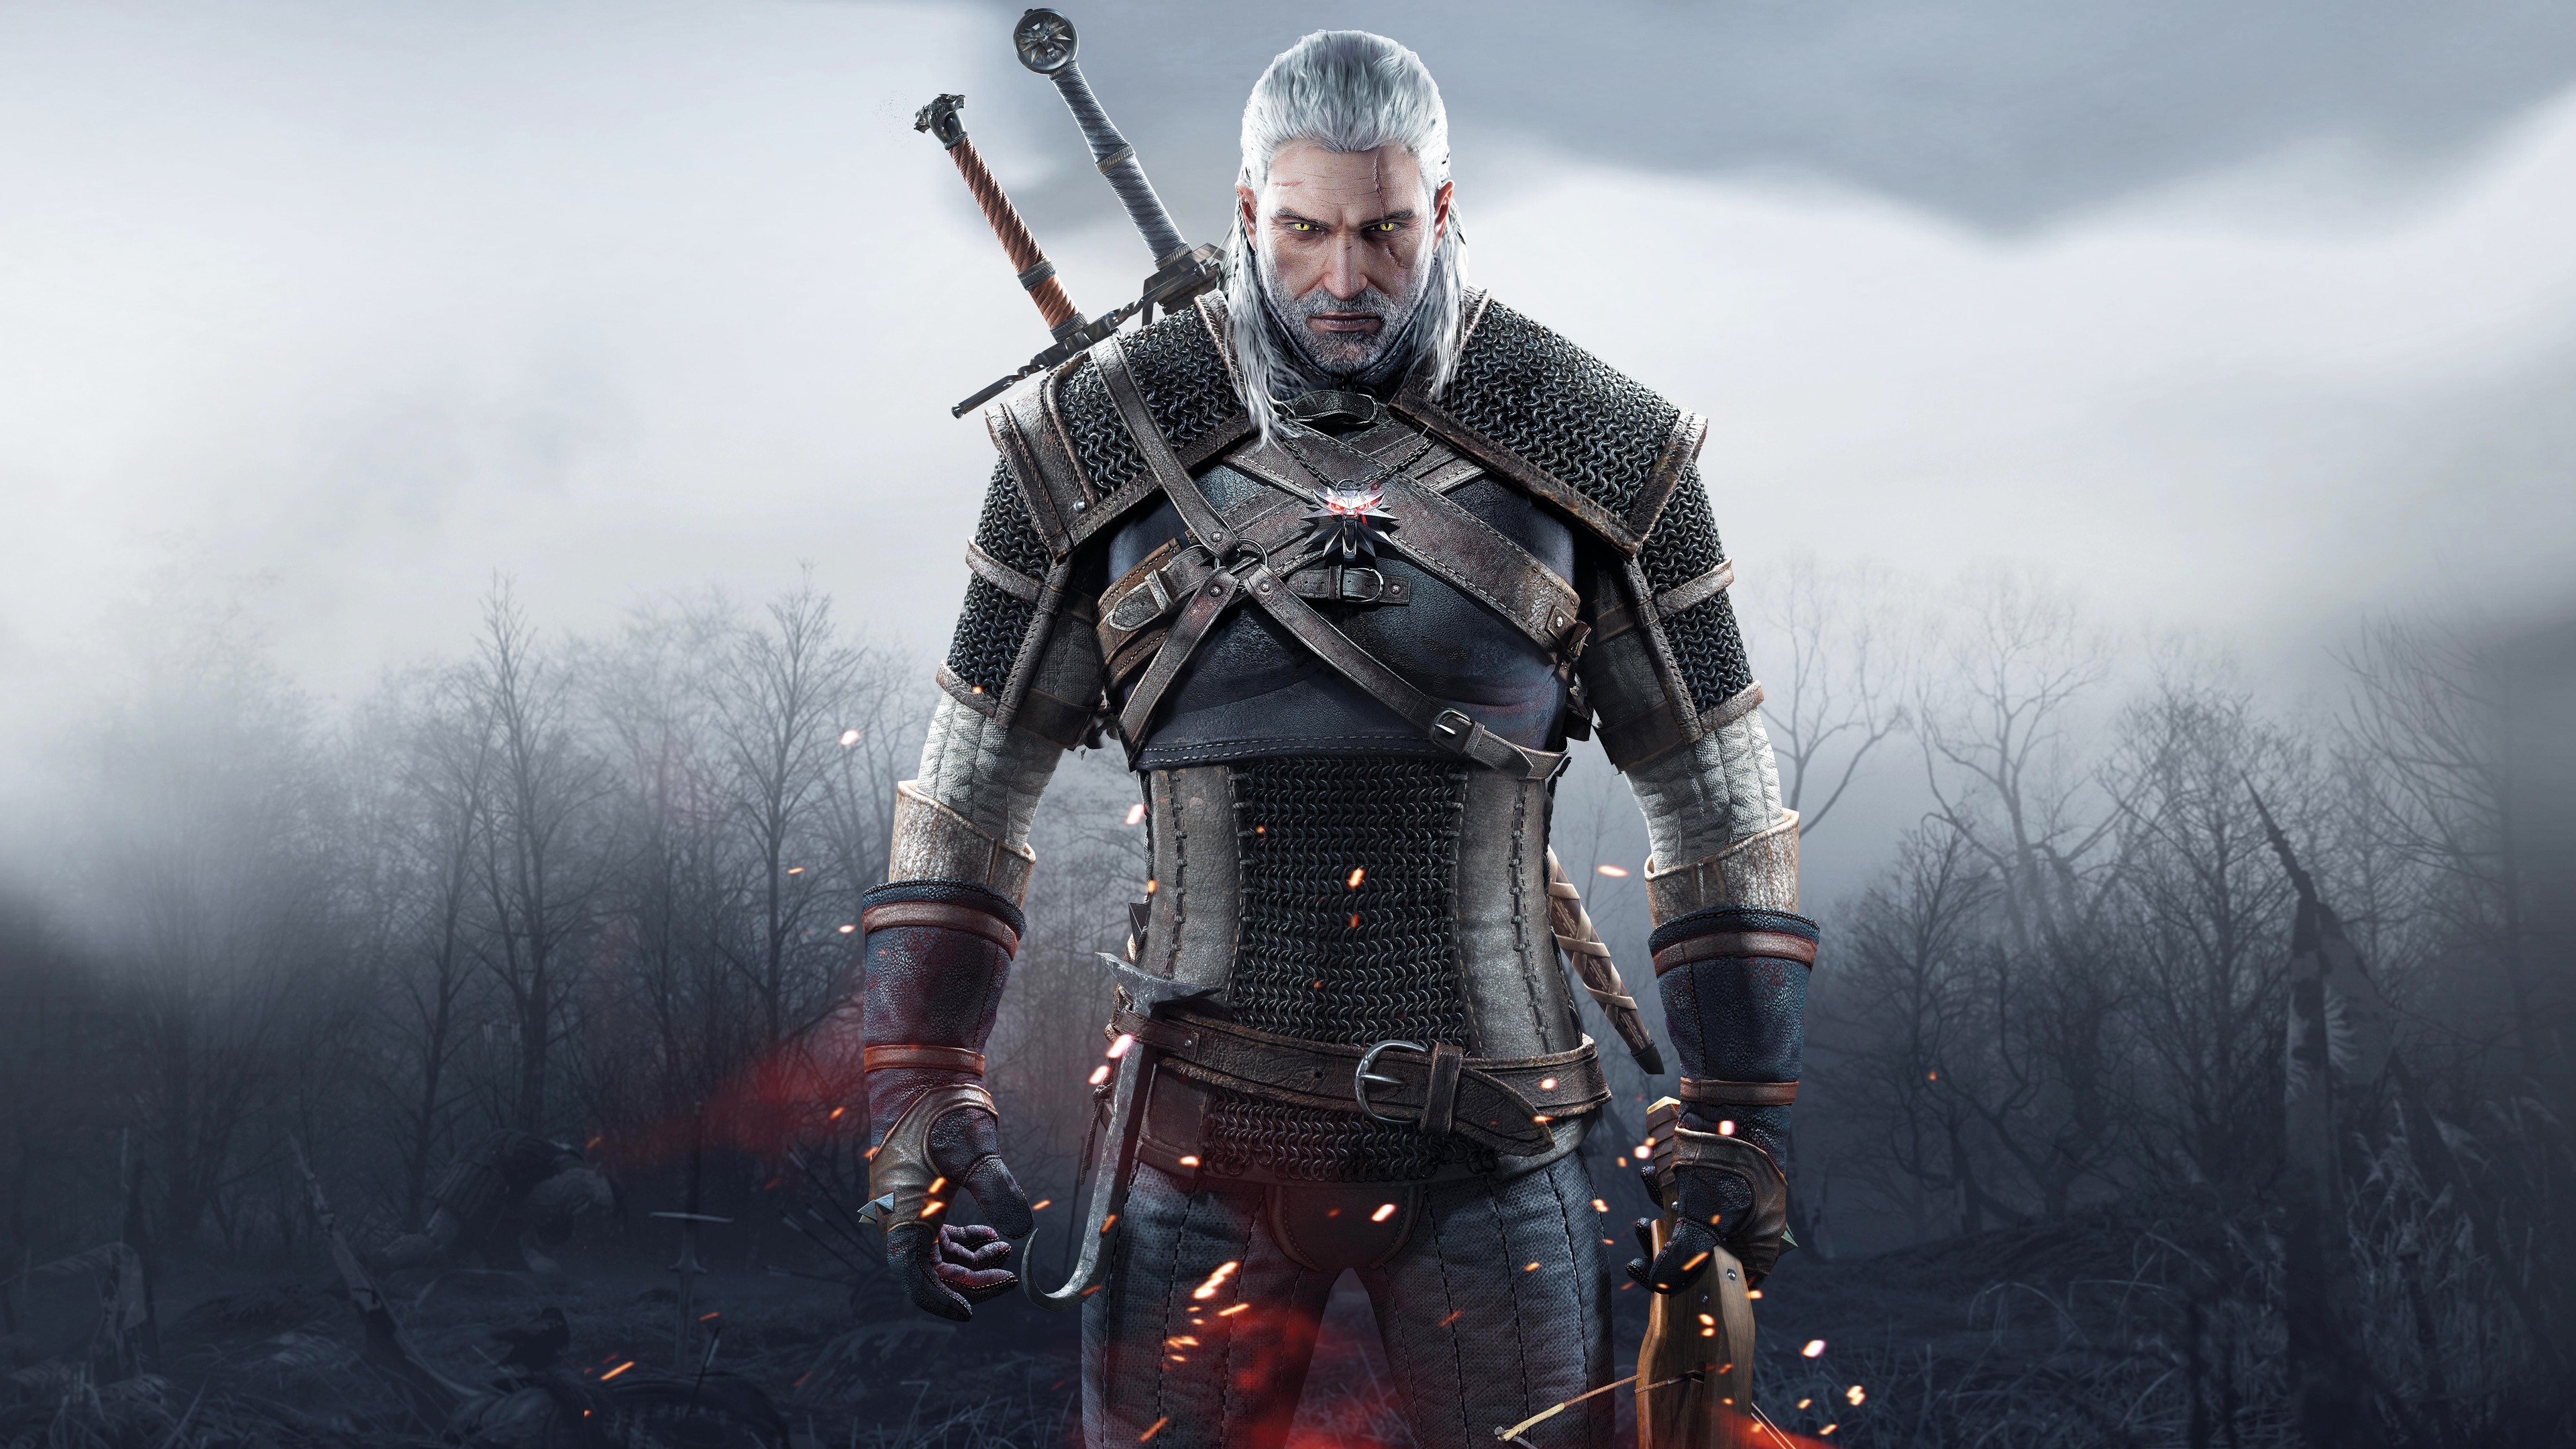 General 3840x2160 The Witcher 3: Wild Hunt Geralt of Rivia sword The Witcher frontal view looking at viewer video games PC gaming video game characters video game men fantasy men video game art RPG